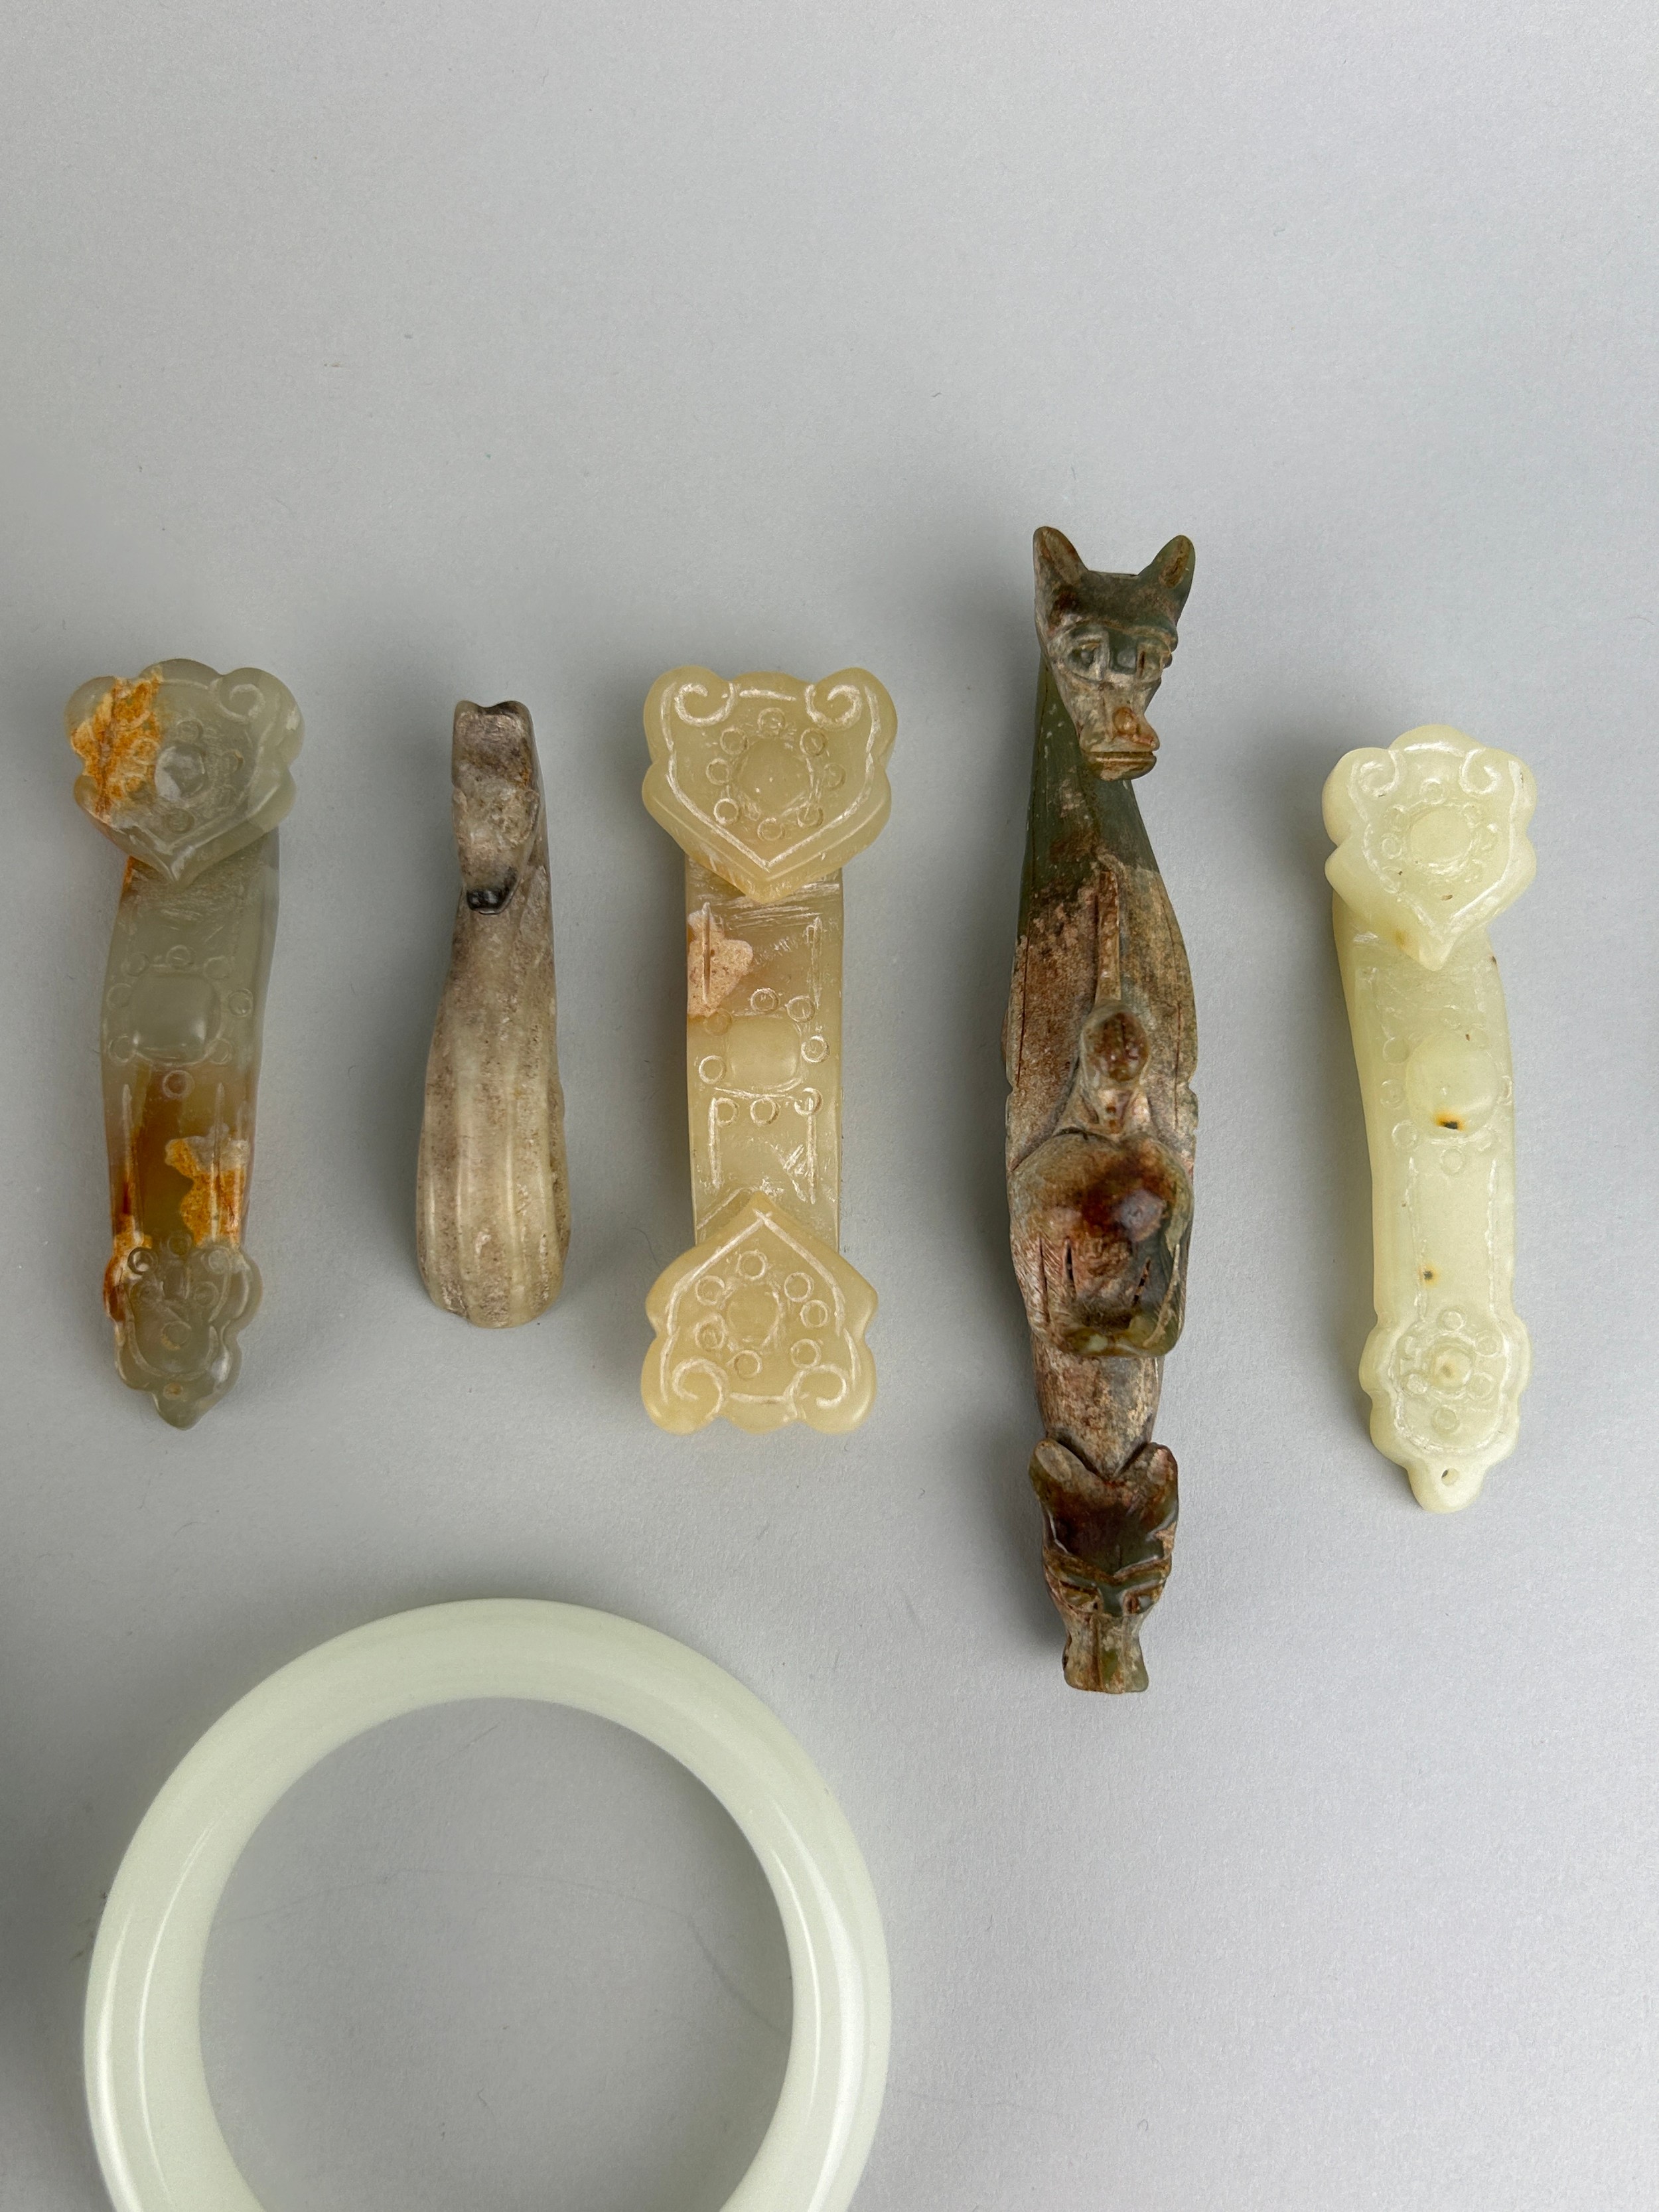 A COLLECTION OF FIVE CHINESE JADE OR STONE BANGLES ALONG WITH FIVE BELT HOOKS SOME IN THE ARCHAIC - Image 3 of 5